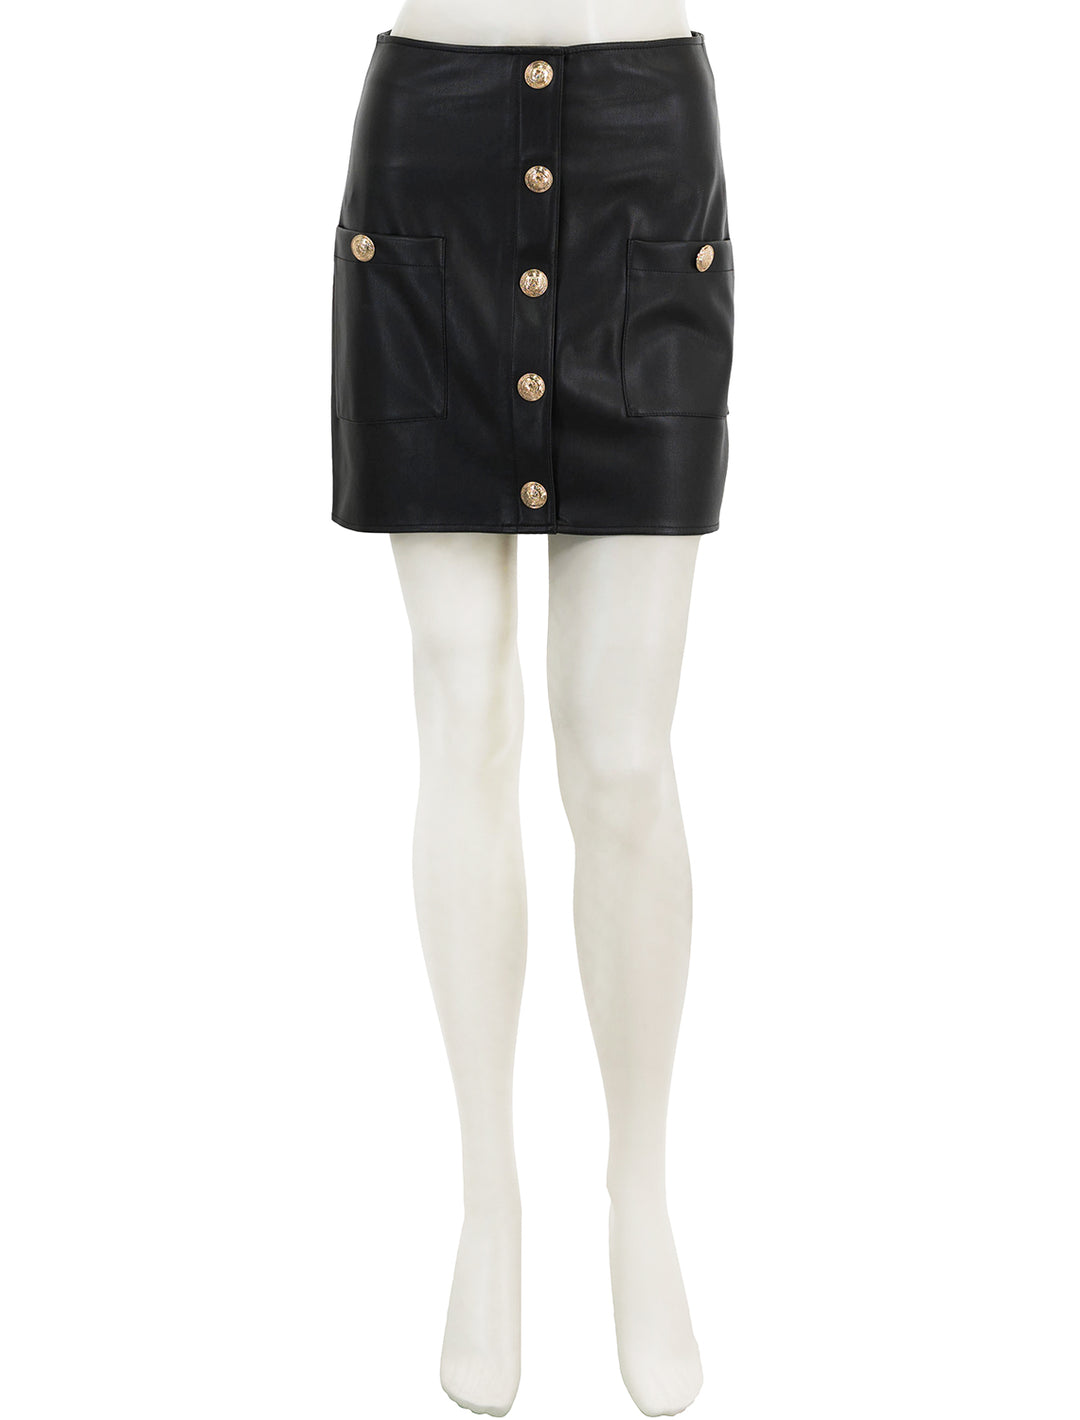 Front view of L'agence's truman mini skirt in black.